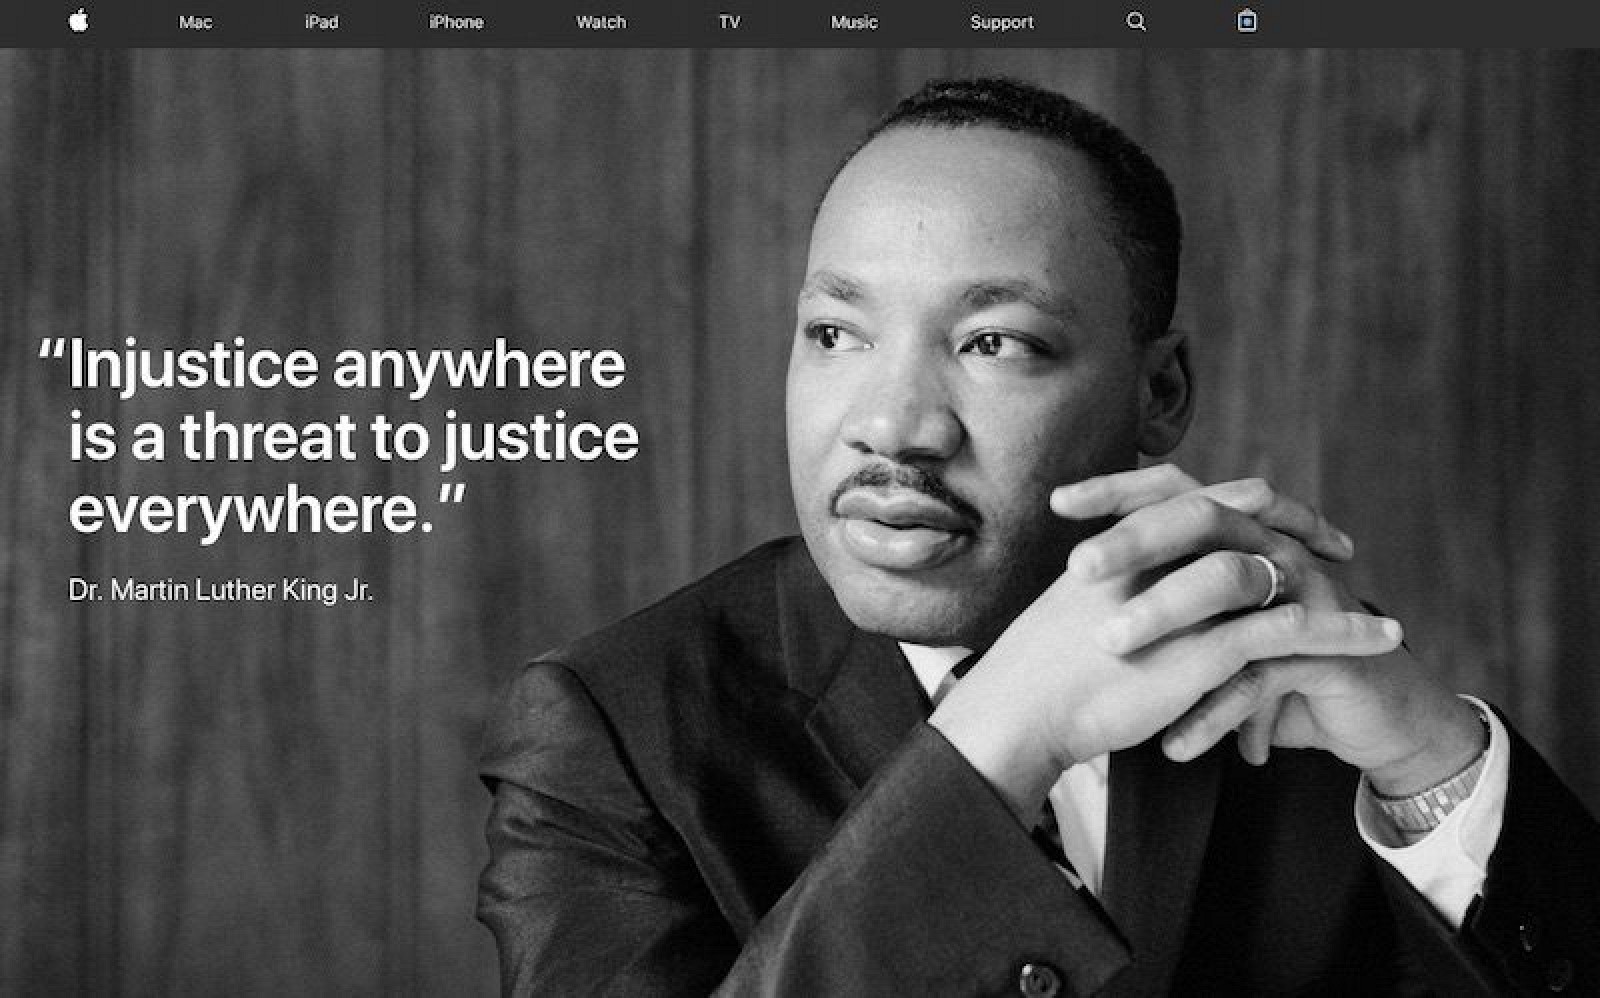 photo of Apple and Tim Cook Commemorate Dr. Martin Luther King, Jr. image